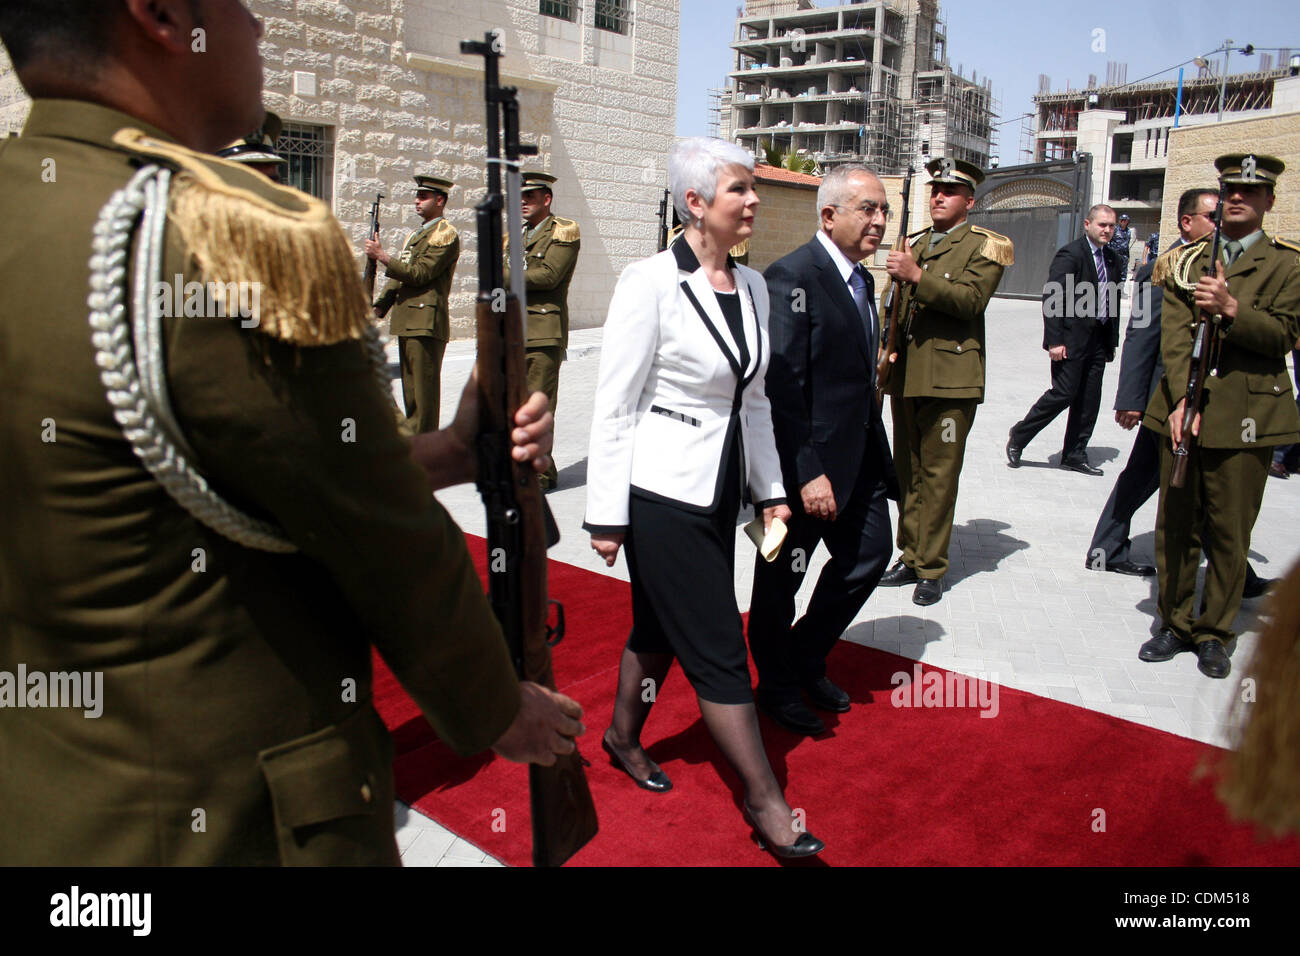 Palestinian Prime Minister Salam Fayyad  reviews honor guards with the Croatian counterpart Jadranka Kosor upon her arrival to the West Bank city of Ramallah, on March 31,2011. Photo by Issam Rimawi Stock Photo